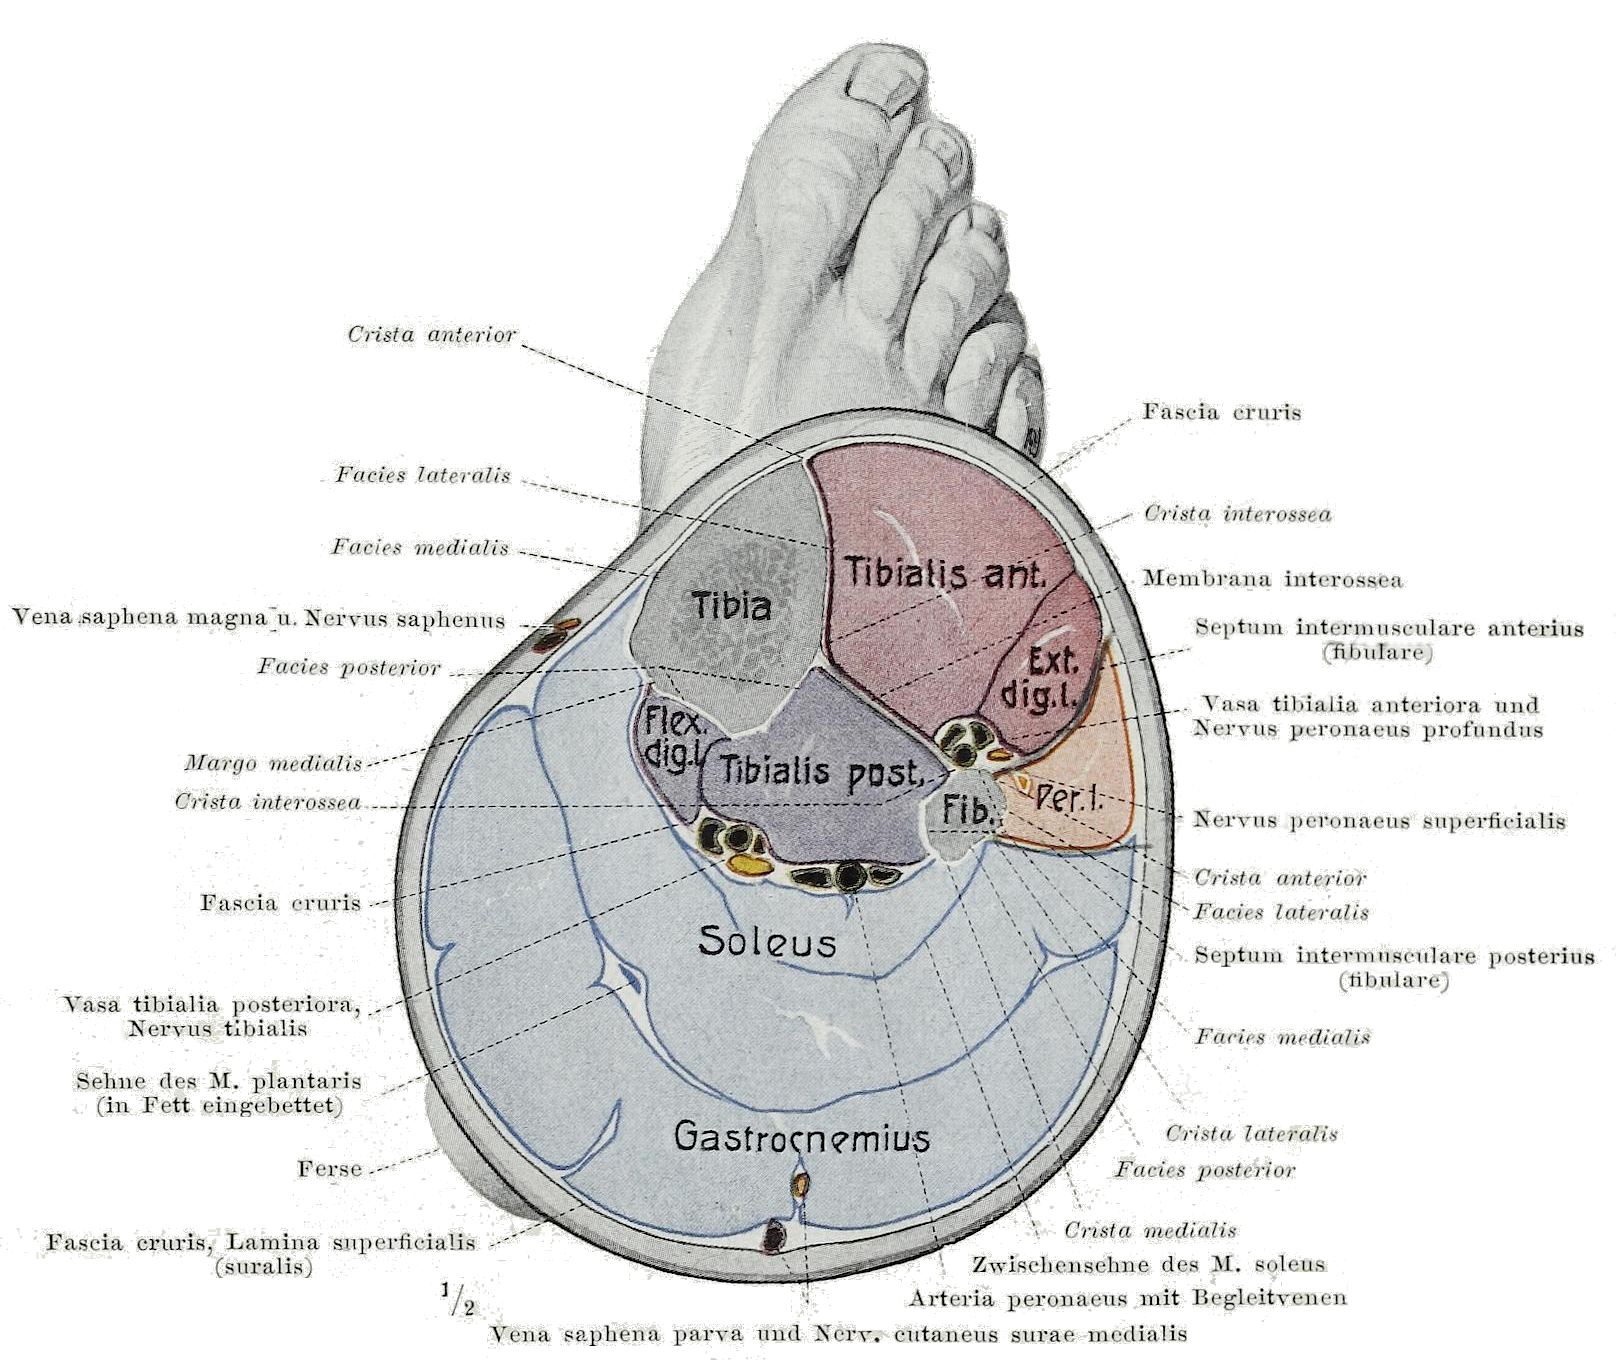 Illustration of a cross-section of the lower leg with lower extermity muscles and fascia labeled.